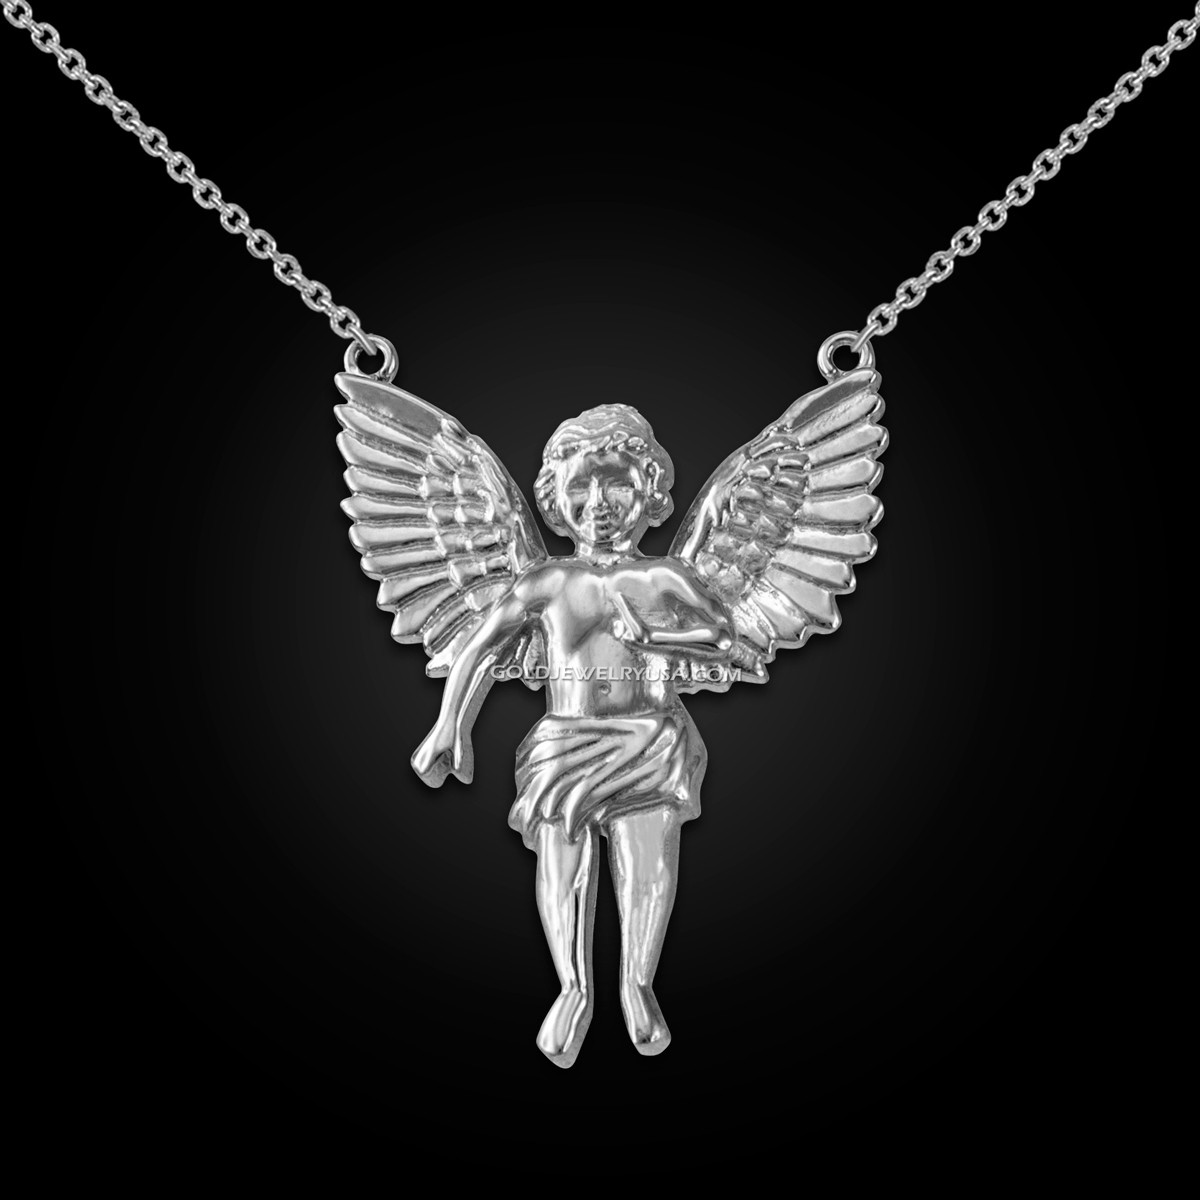 2022 NEW Men's 316L stainless-steel Classic Angel Wings Pendant Necklace  for teens punk fashion jewelry Gift free shipping